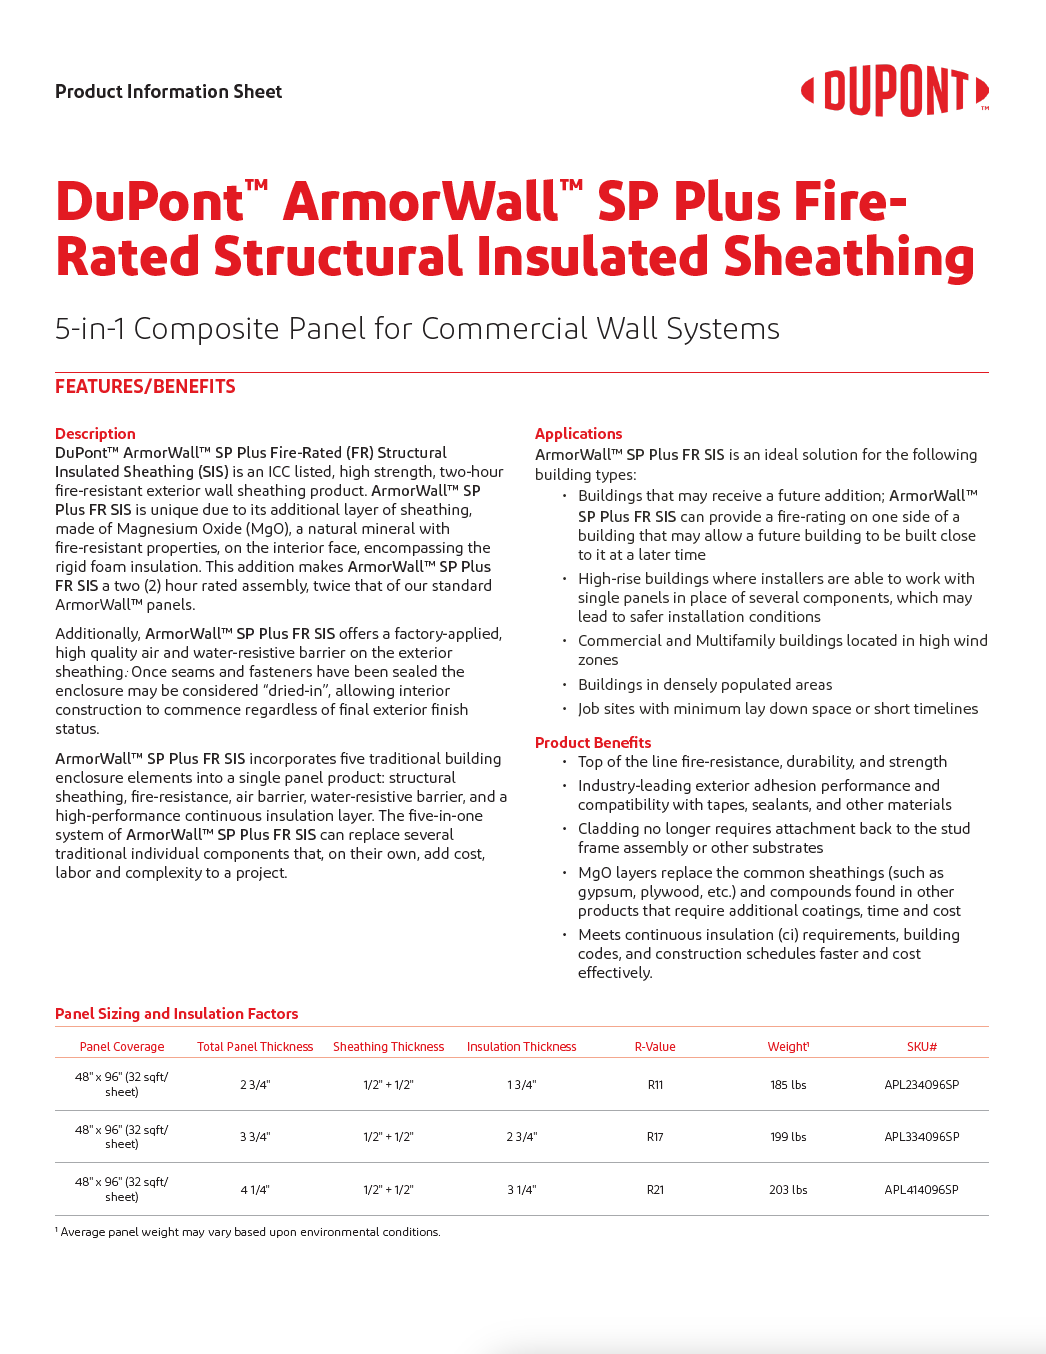 ArmorWall SP Plus Fire-Rated Structural Insulated Sheathing Product Information Sheet